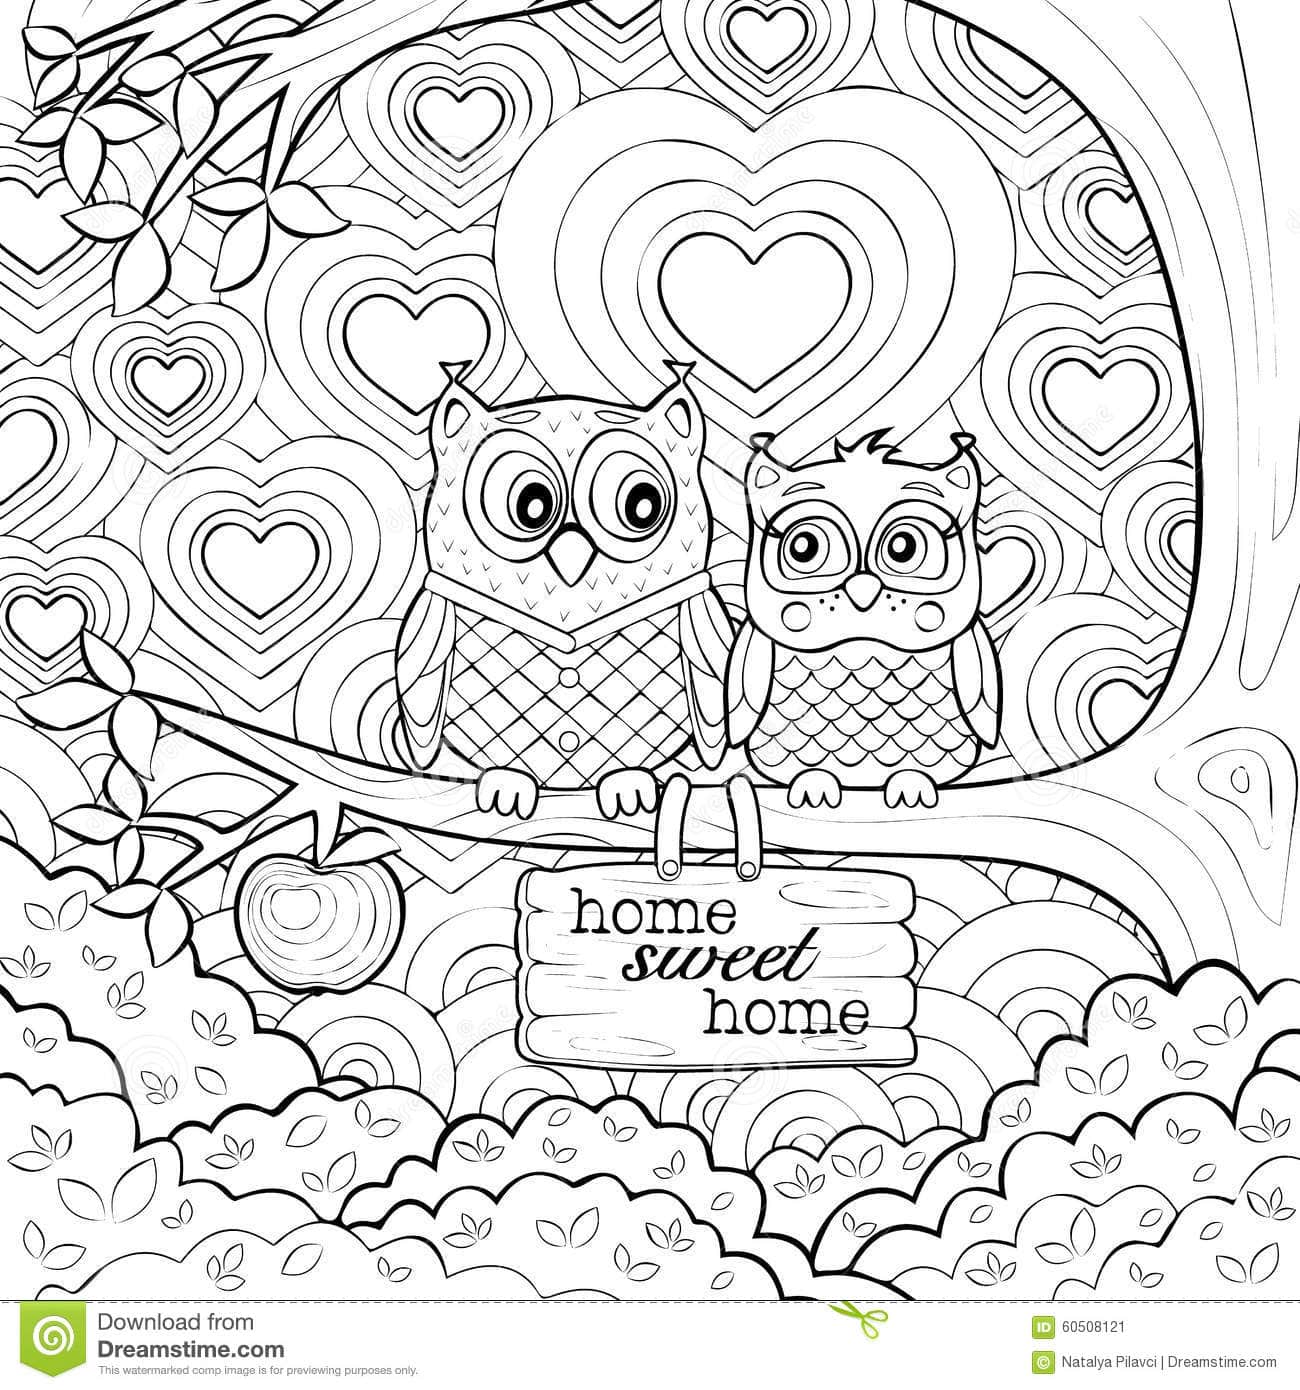 Home Sweet Home | Dreamstime | coloring pages for kids pdf